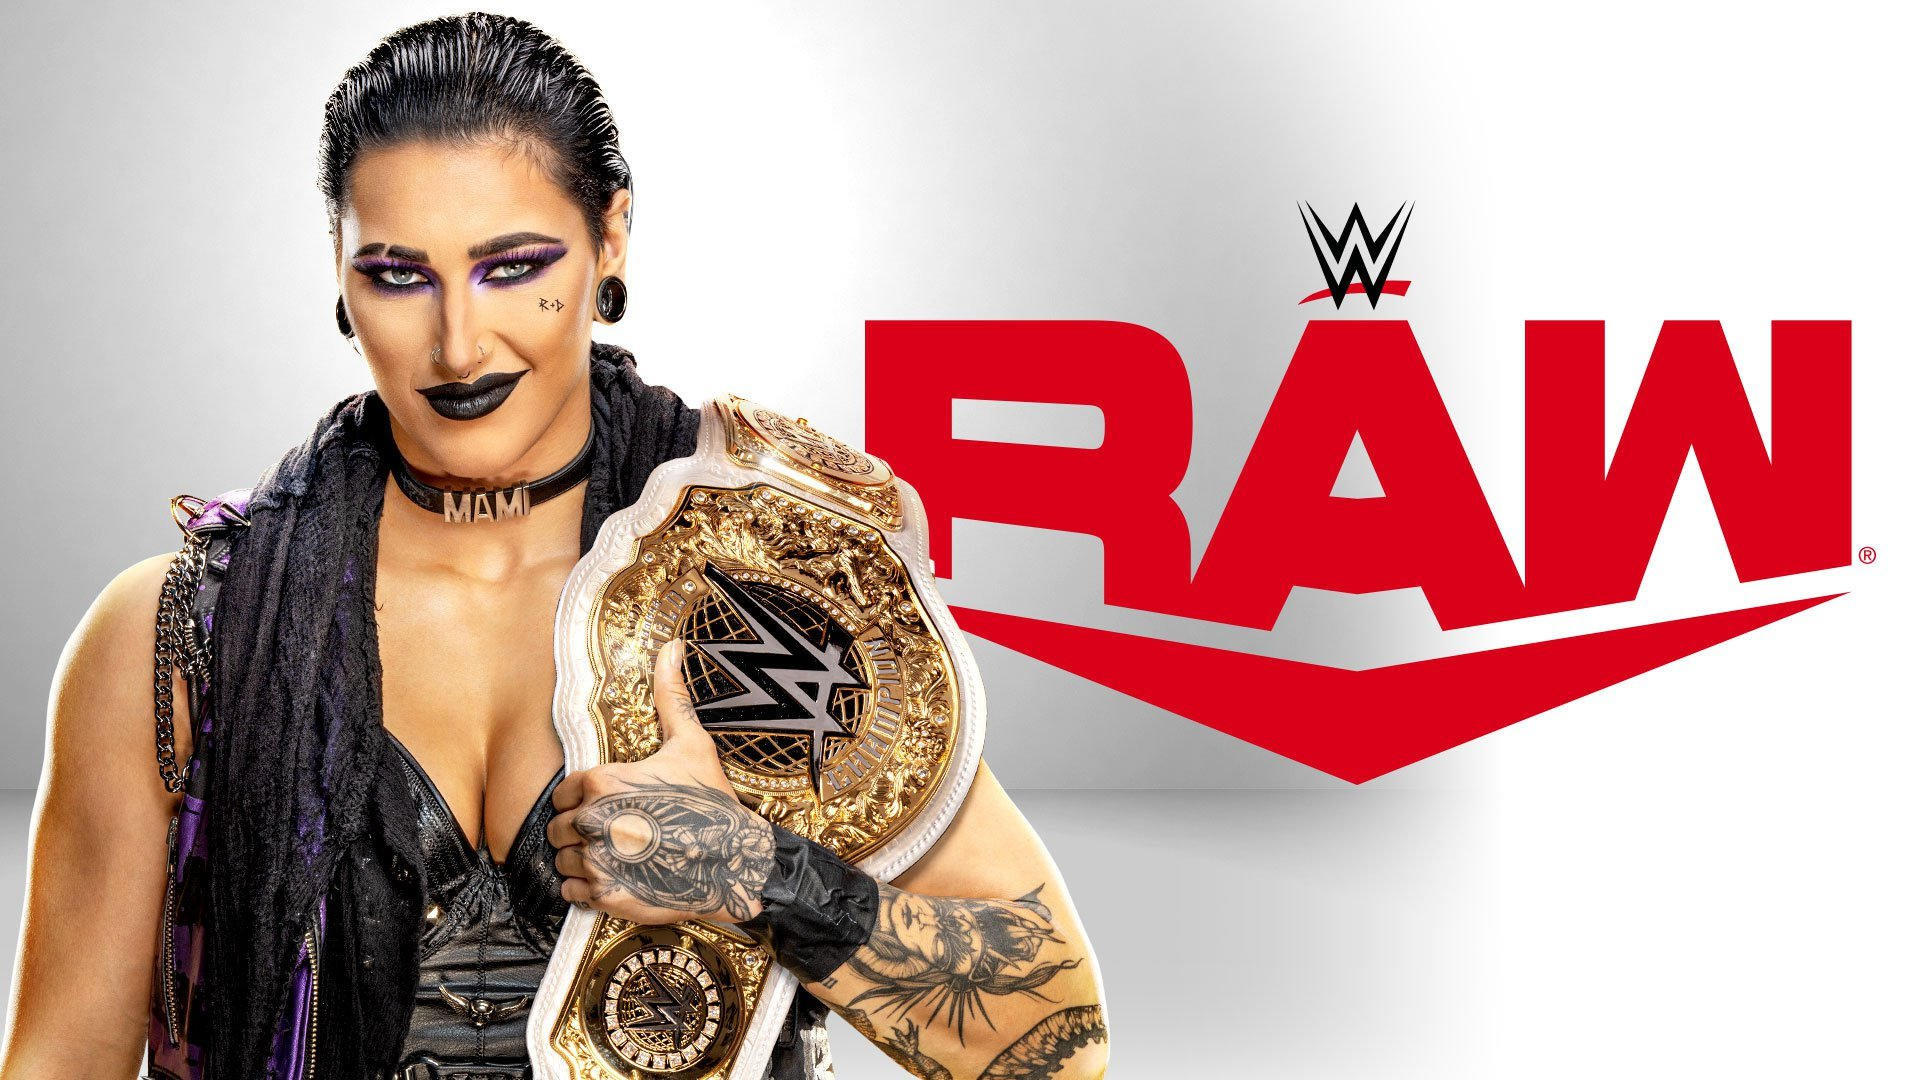 <h1 class="tribe-events-single-event-title">WWE Monday Night Raw</h1>